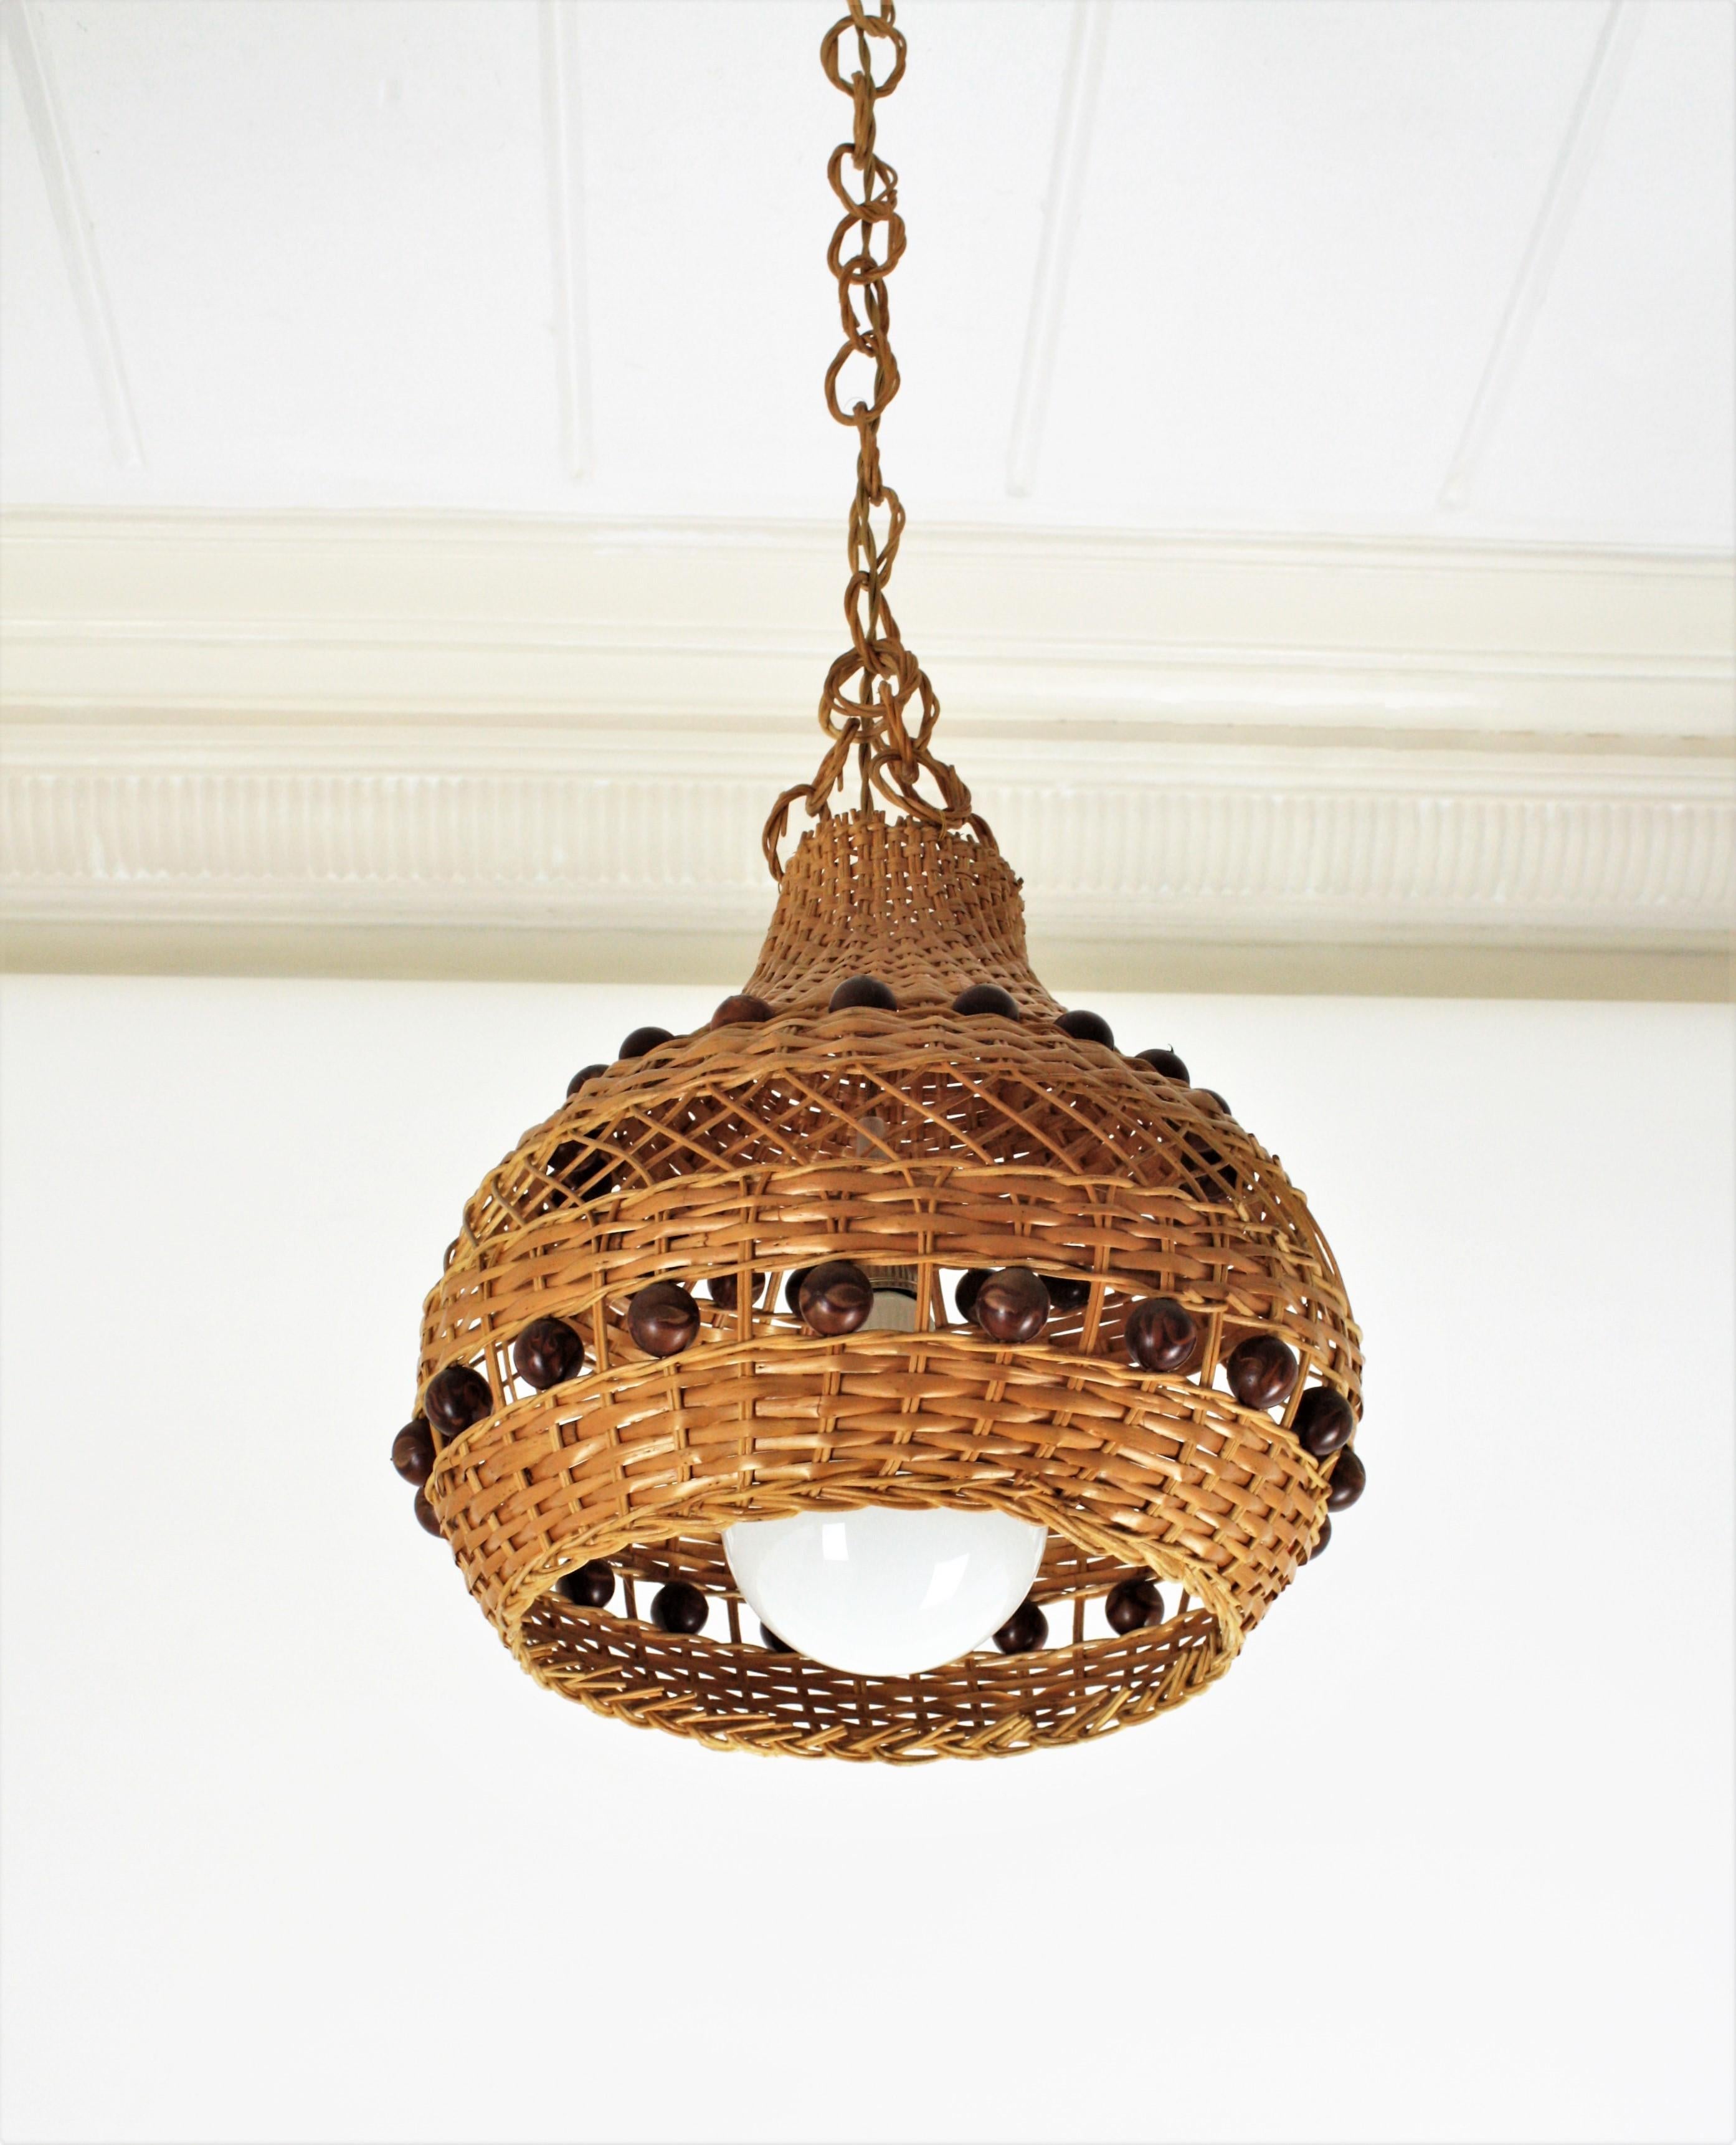 Spanish Rattan Pendant Light / Lantern with Balls Accents For Sale 2